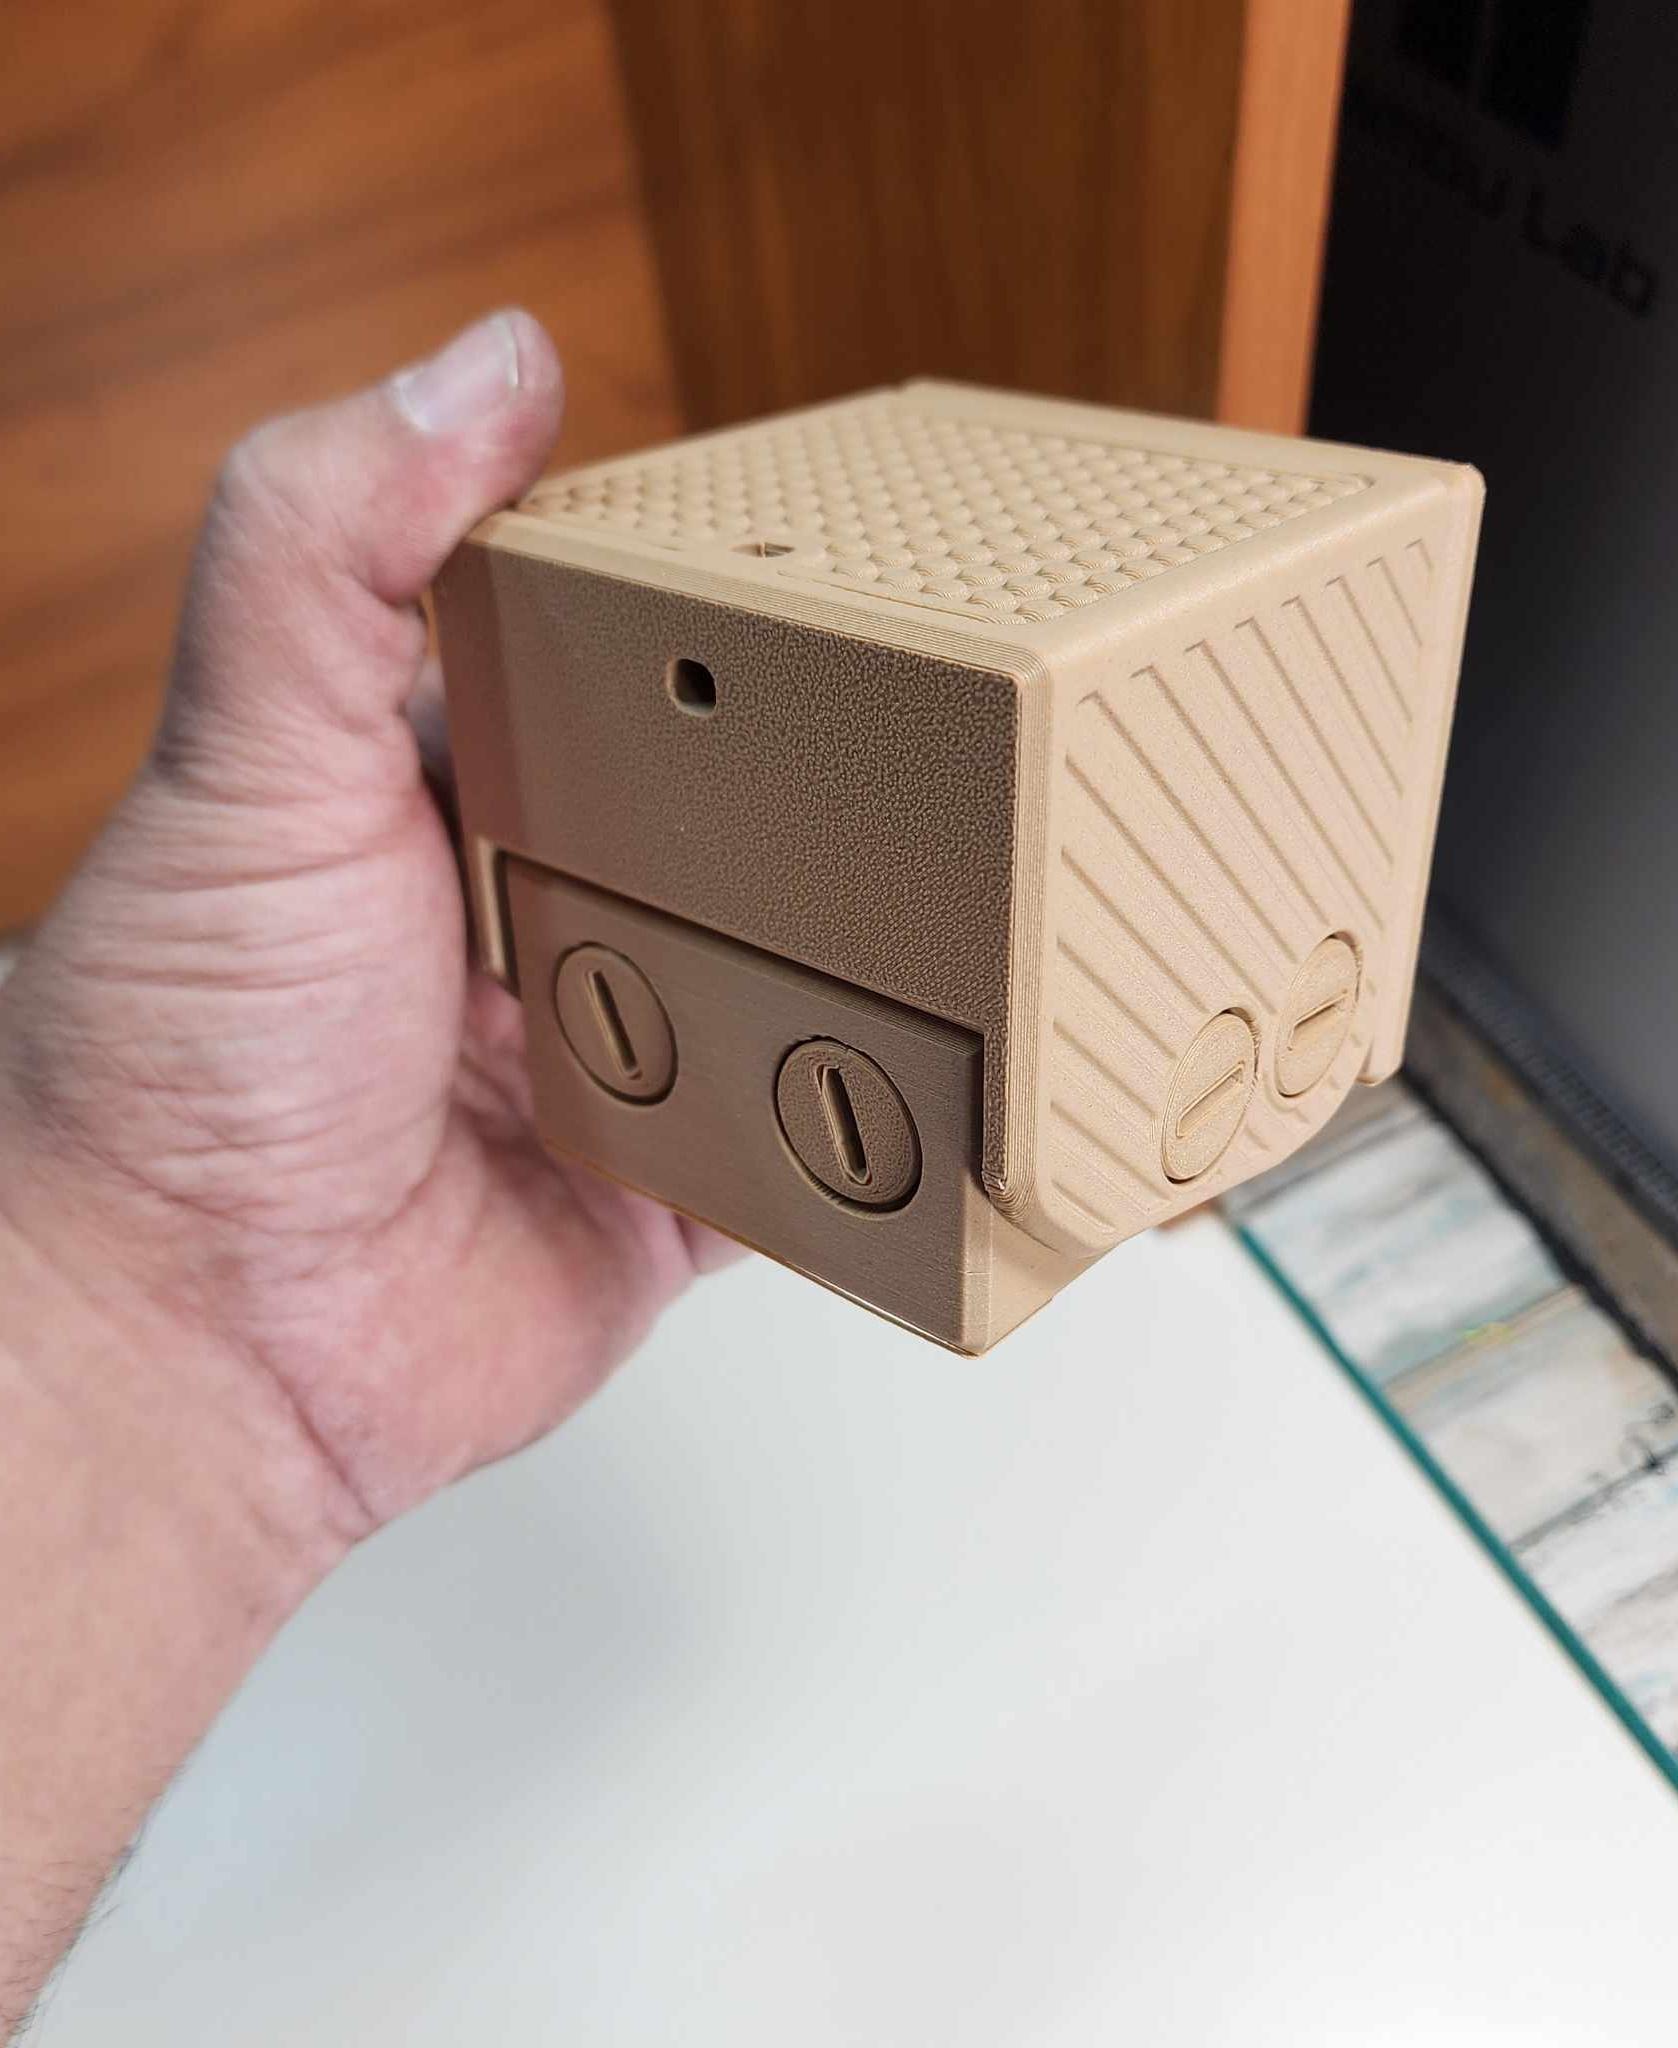 Mini Annoying Cash Gift Box - Print in Place, Articulating, 15 bolts of frustration, Tree Ornament  - wood PLA, might be my favorite one so far! - 3d model